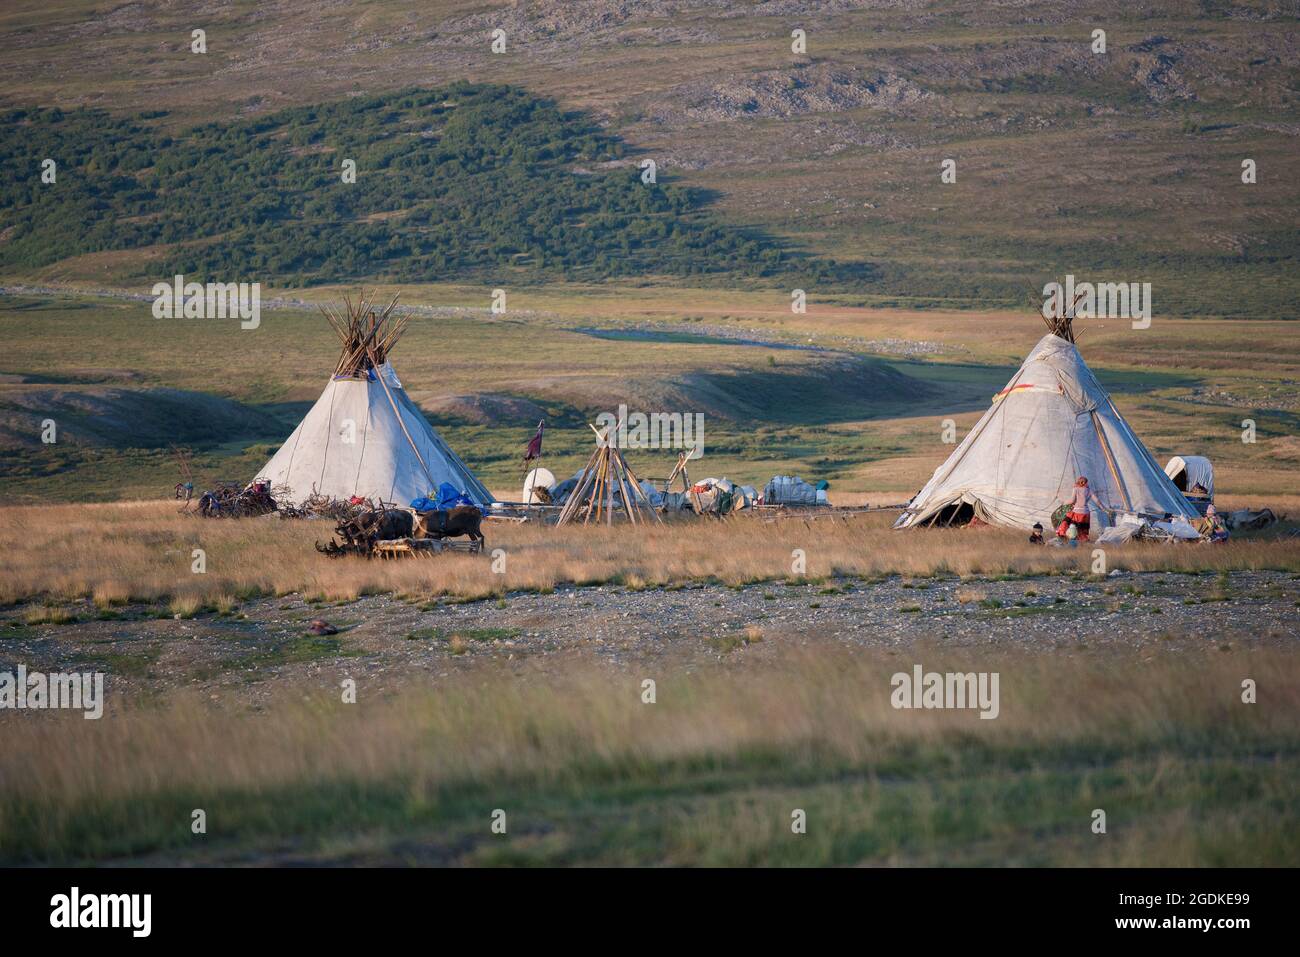 Camp of modern reindeer herders in the Yamal tundra. Russia Stock Photo